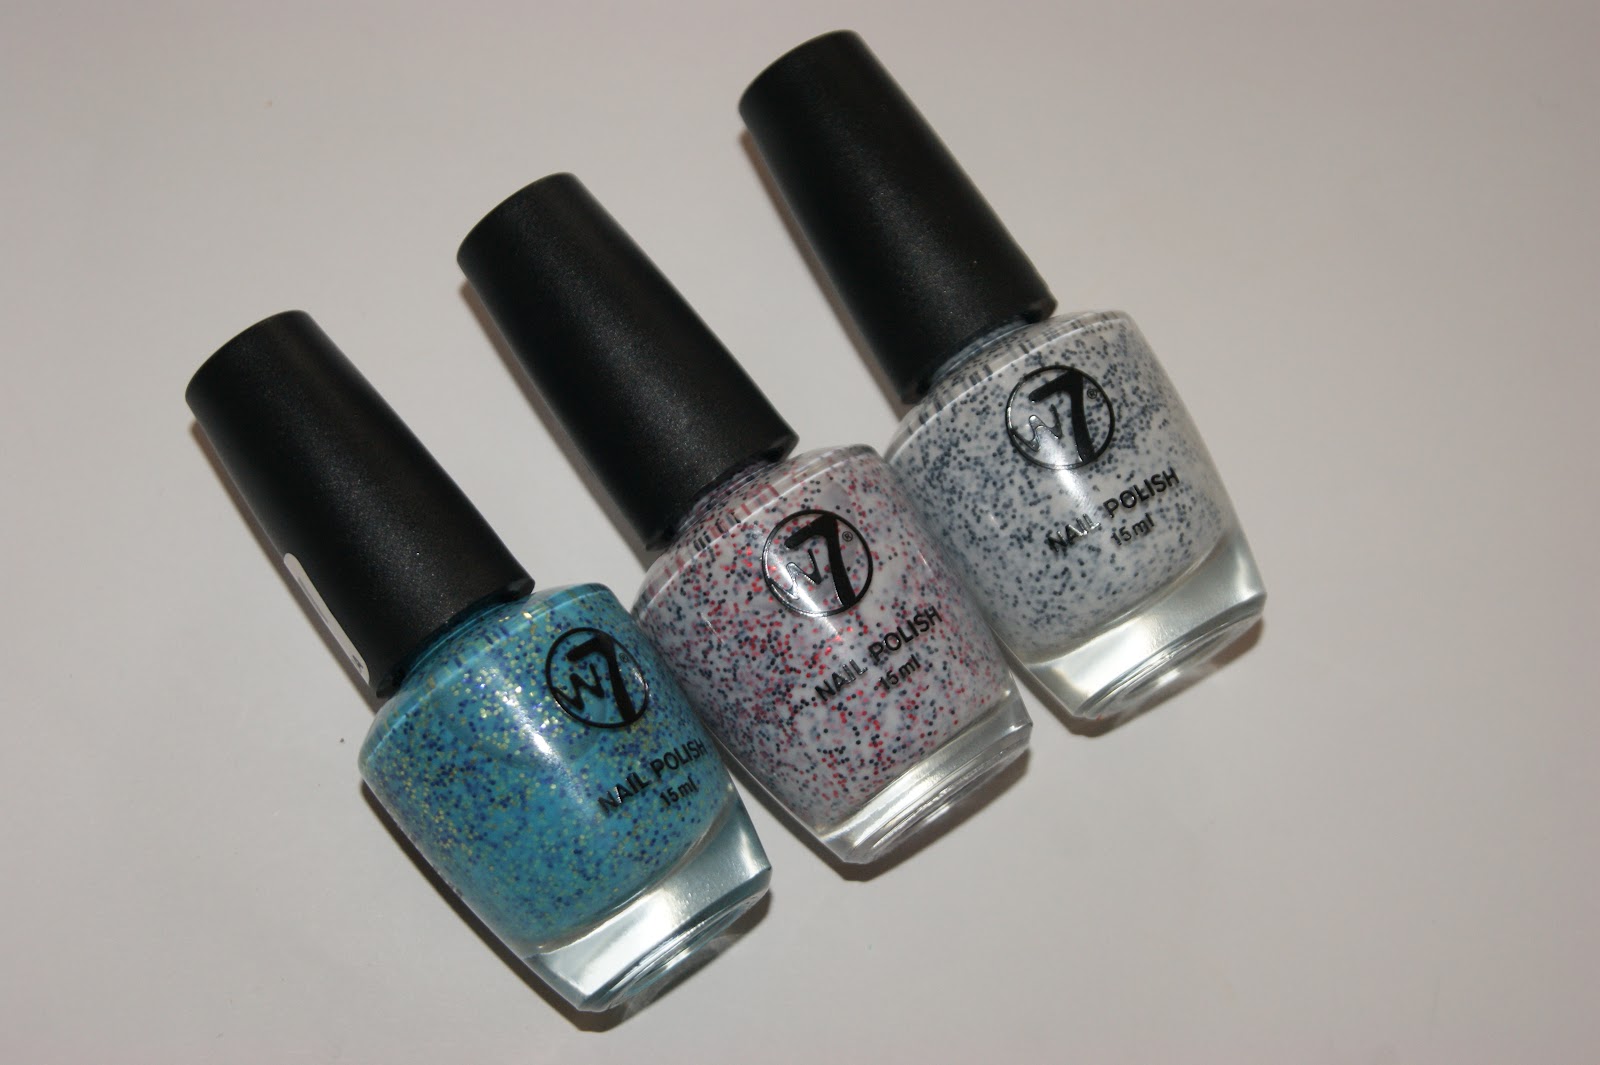 Sunday Glitter Polishes New W7 - Girl (Sprinkle Effect) Review The |